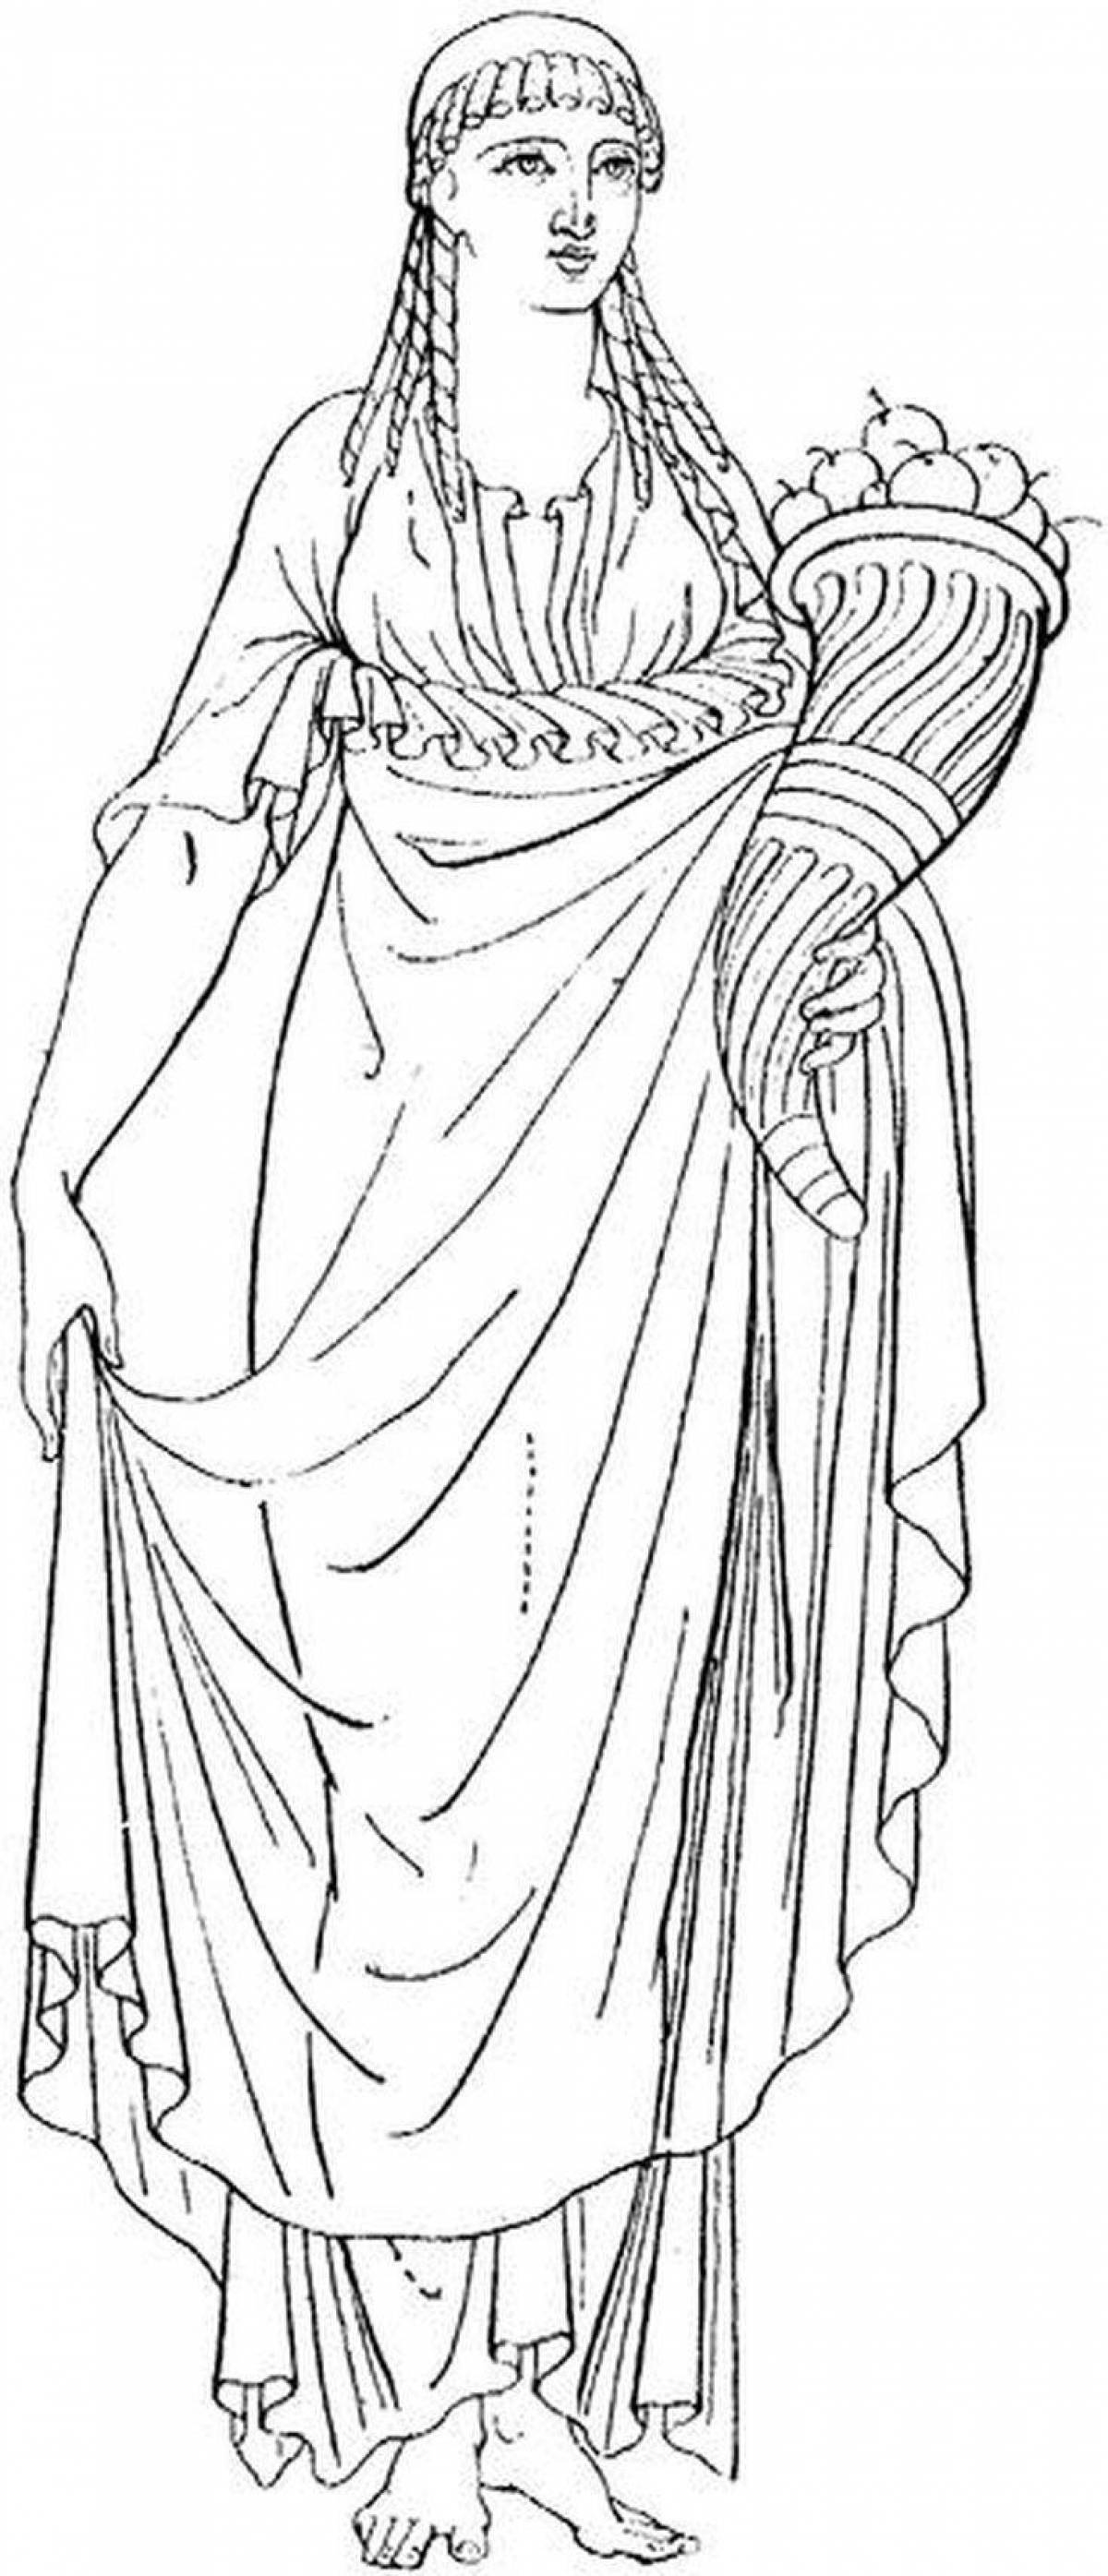 Demeter's shiny coloring page